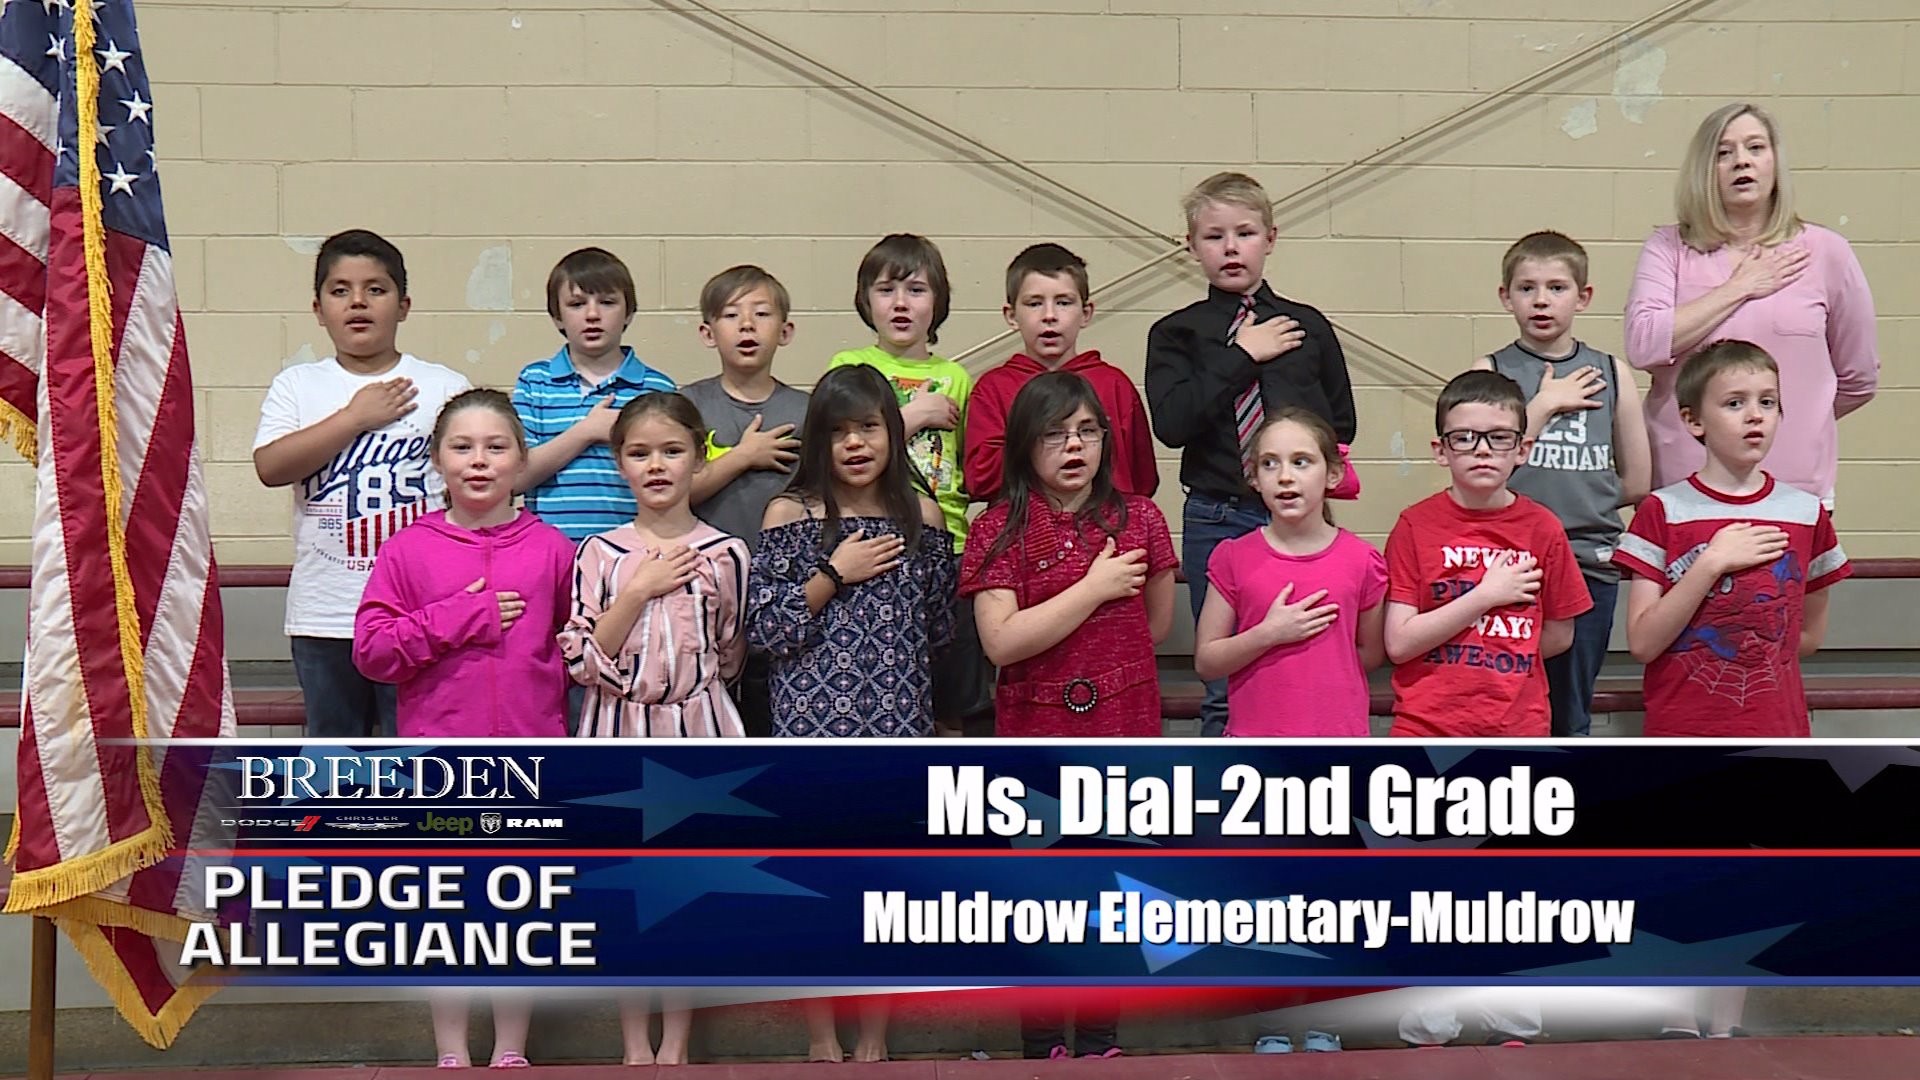 Ms. Dial  2nd Grade Muldrow Elementary, Muldrow